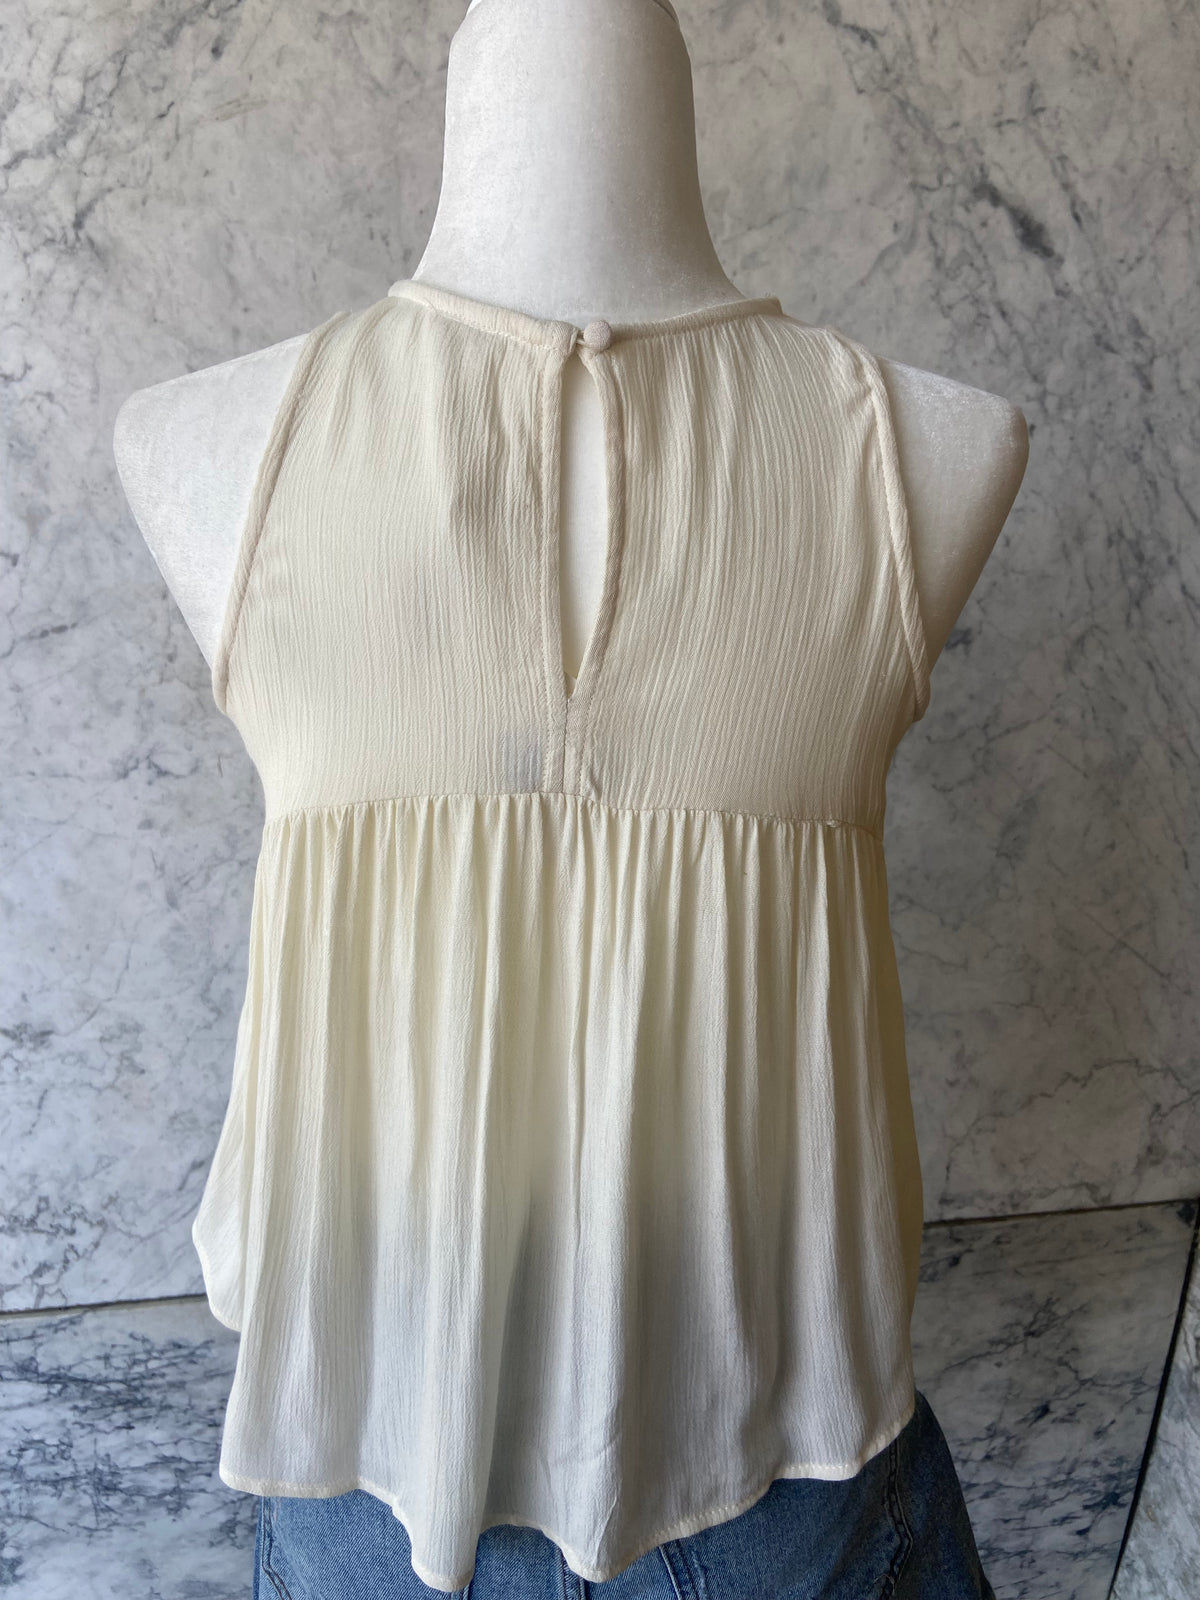 Vintage Lover Lace Tank Top